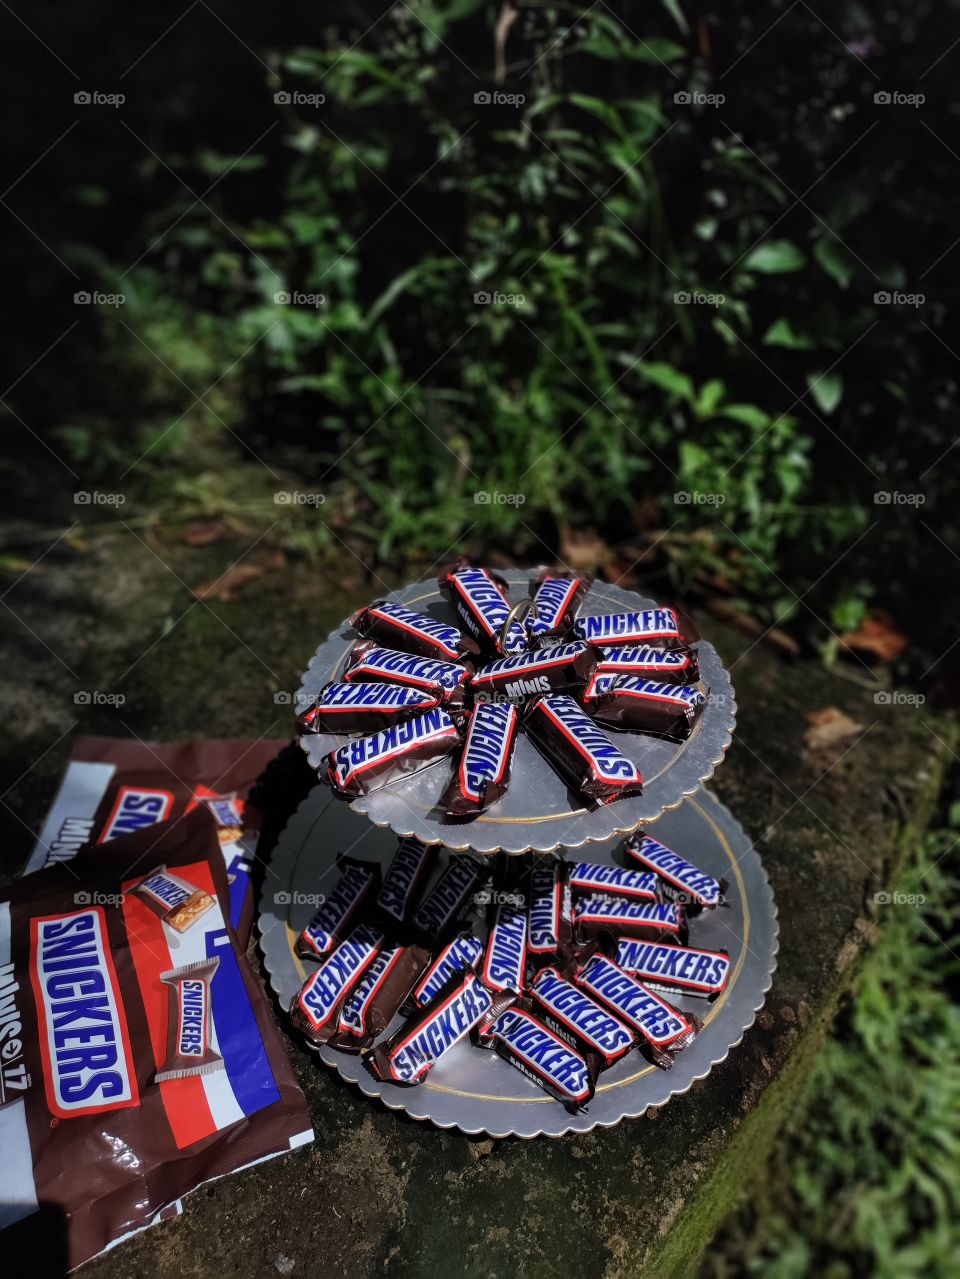 SNICKERS change your mood